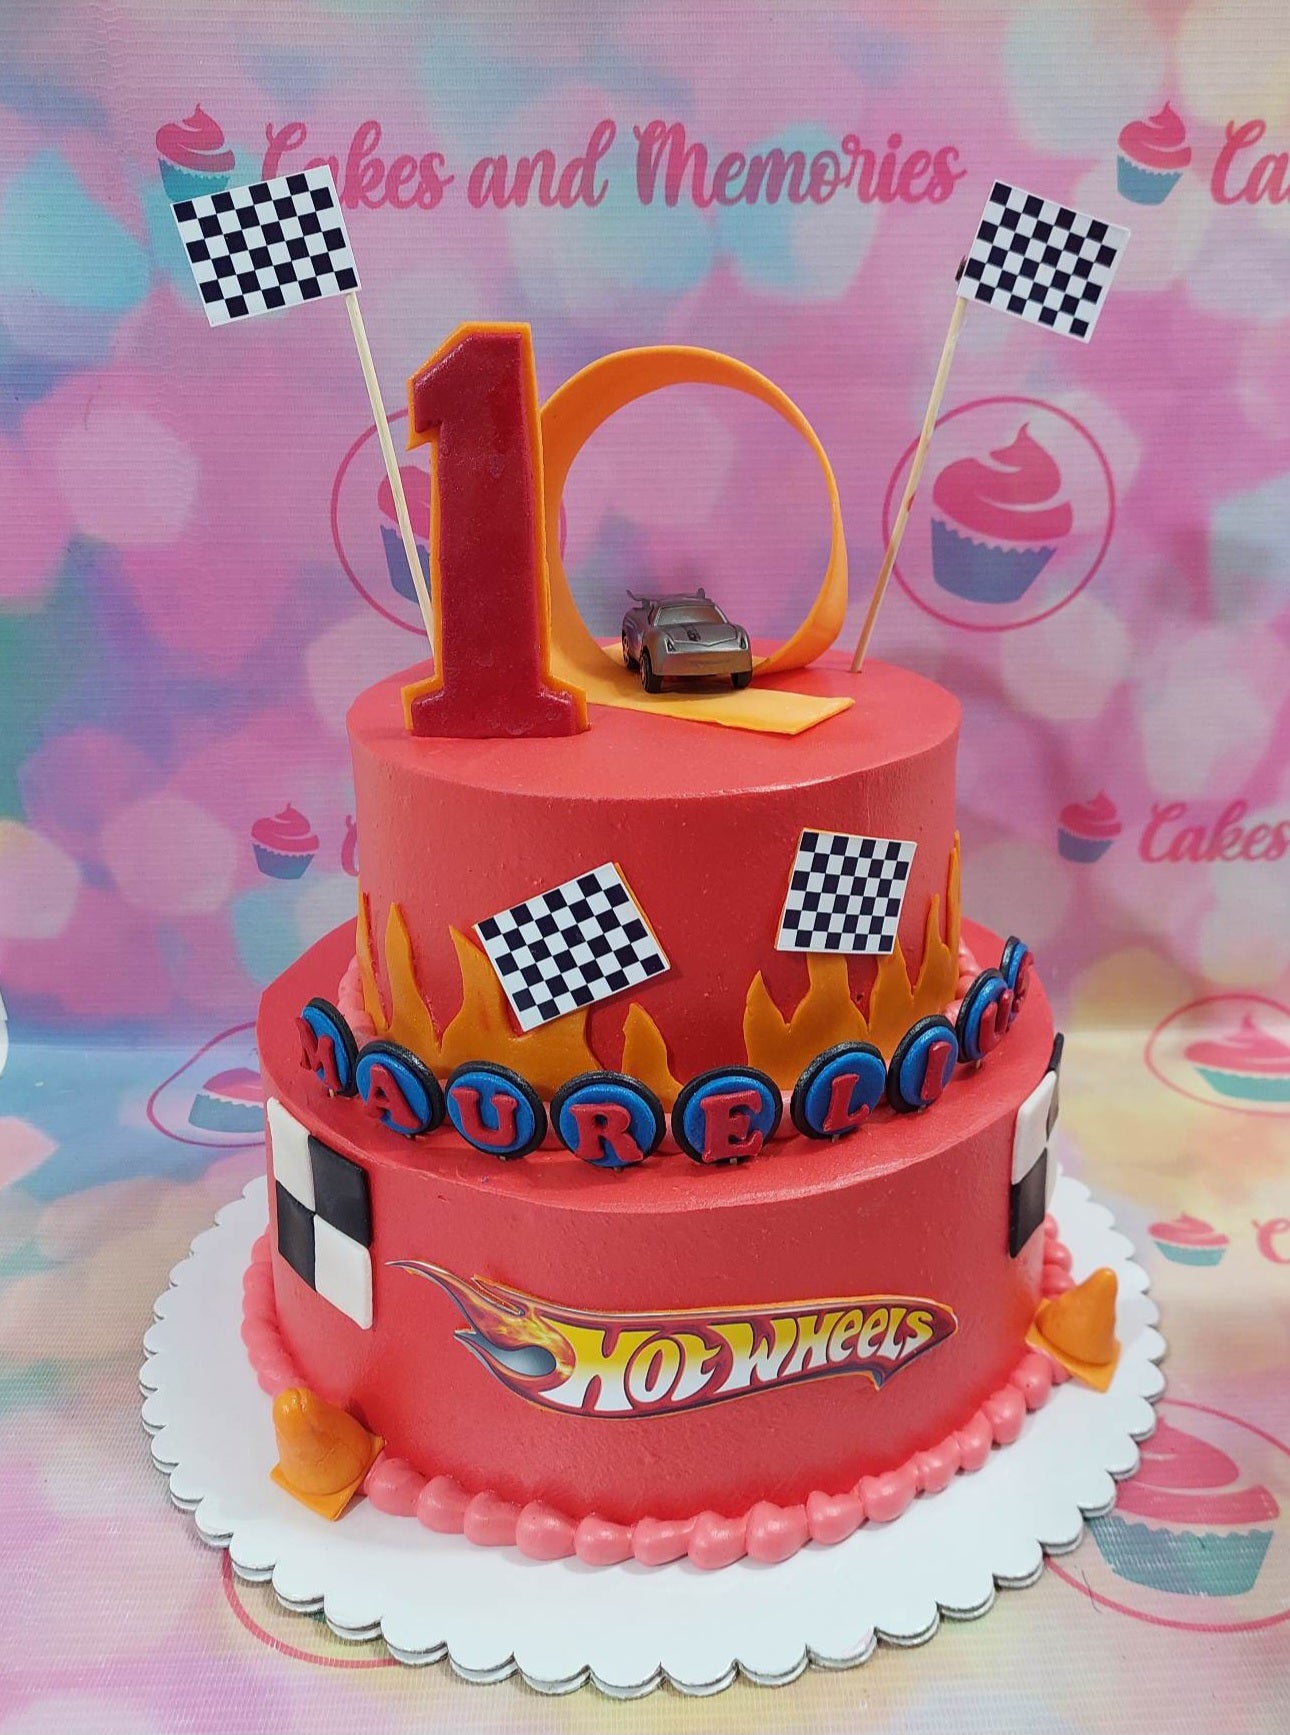 This Hotwheels Cake is perfect for your children's next birthday party! It includes a red race car toy decoration making it a fun and unique custom cake. With its high quality construction, this cake will be a hit with kids and adults alike.